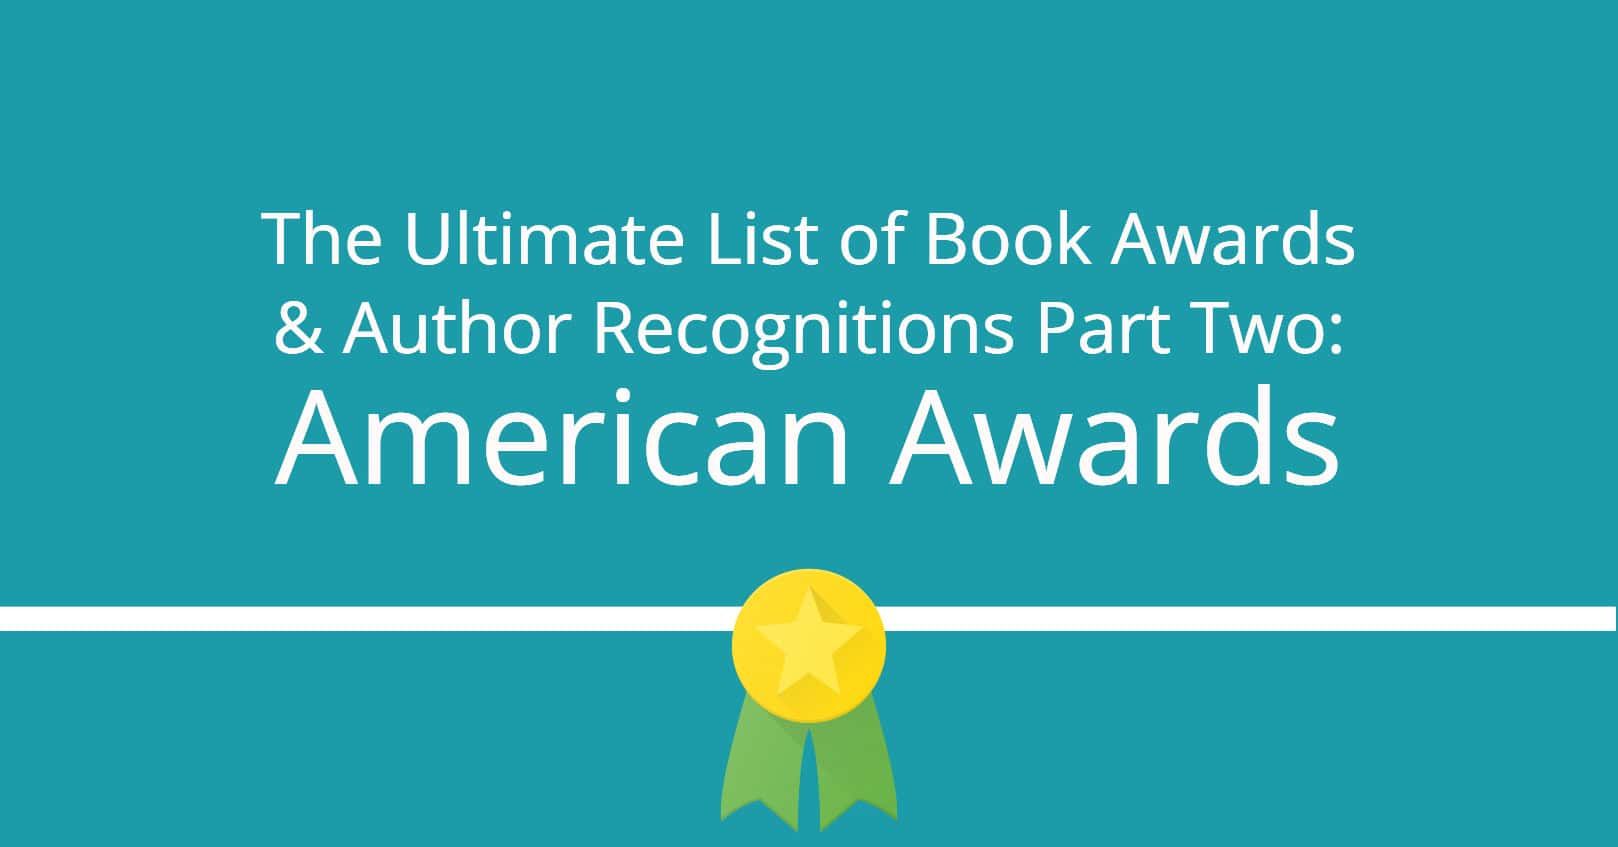 The Ultimat List of Book Awards Part 2